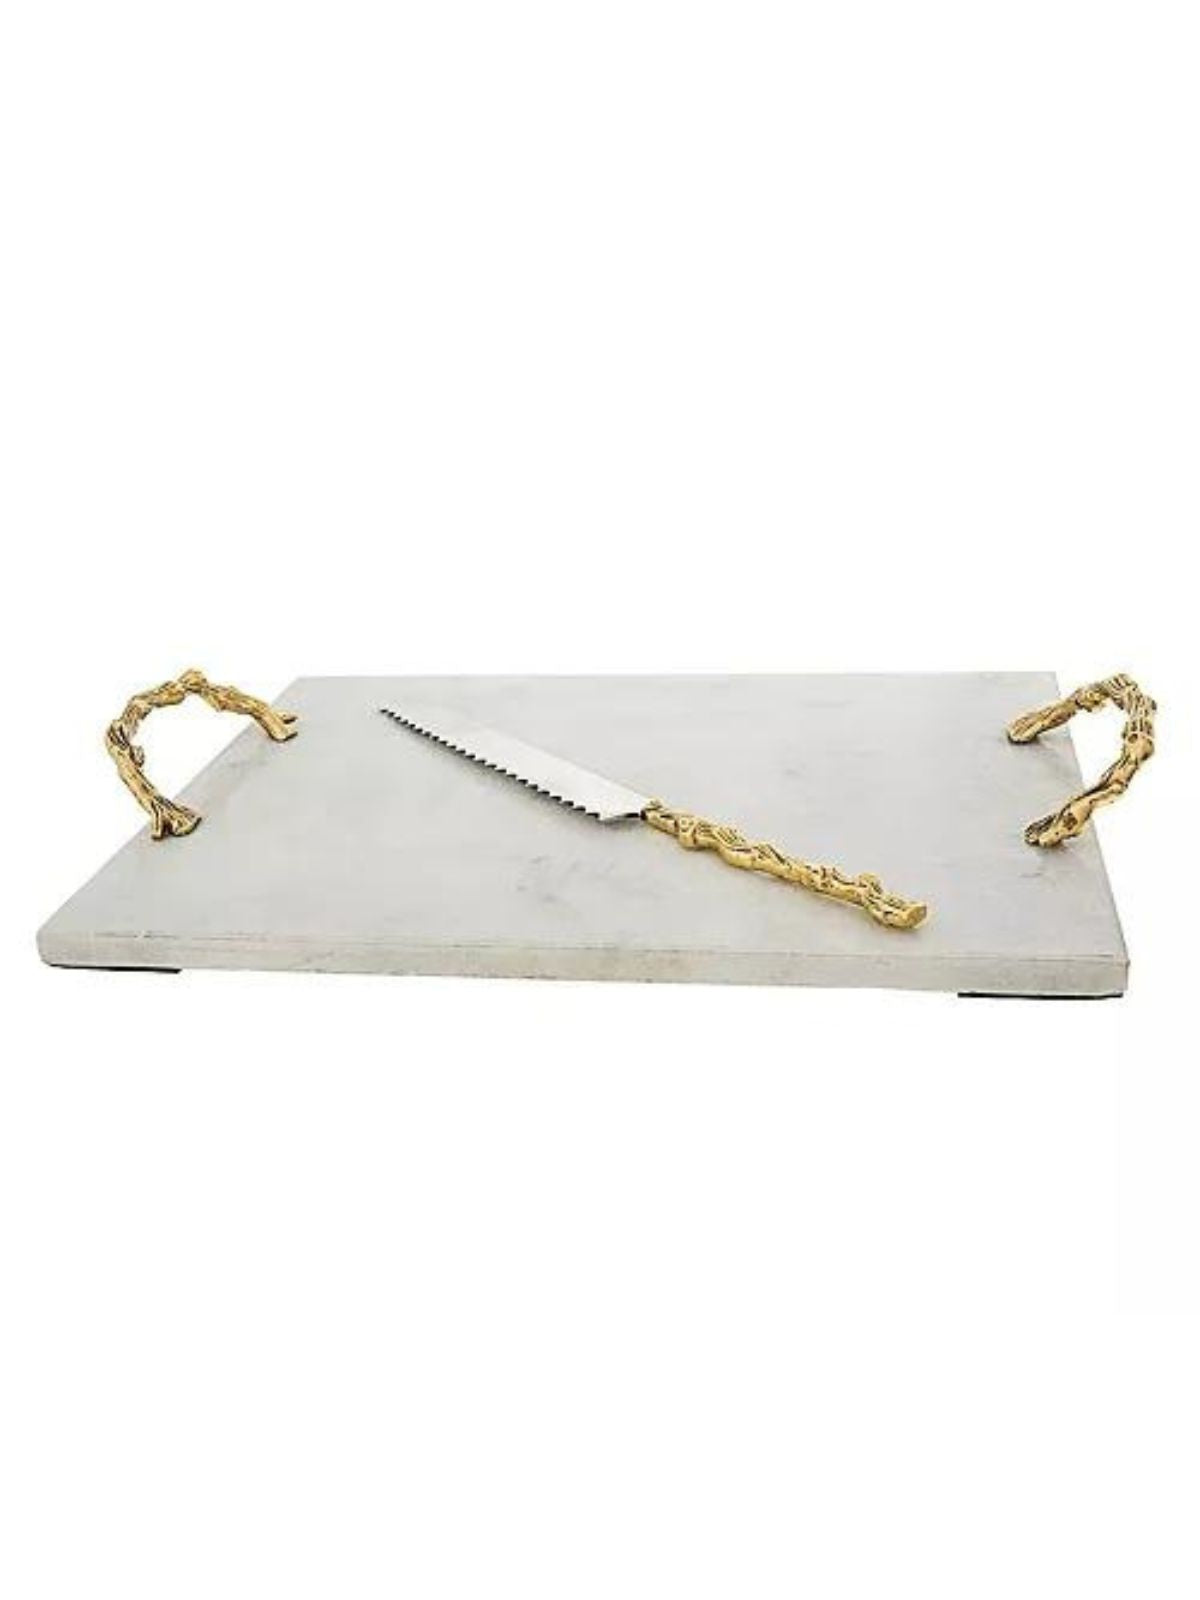 This Rectangular marble board with knife has gold bamboo designed handles measuring 14.5L x 11W sold by KYA Home Decor